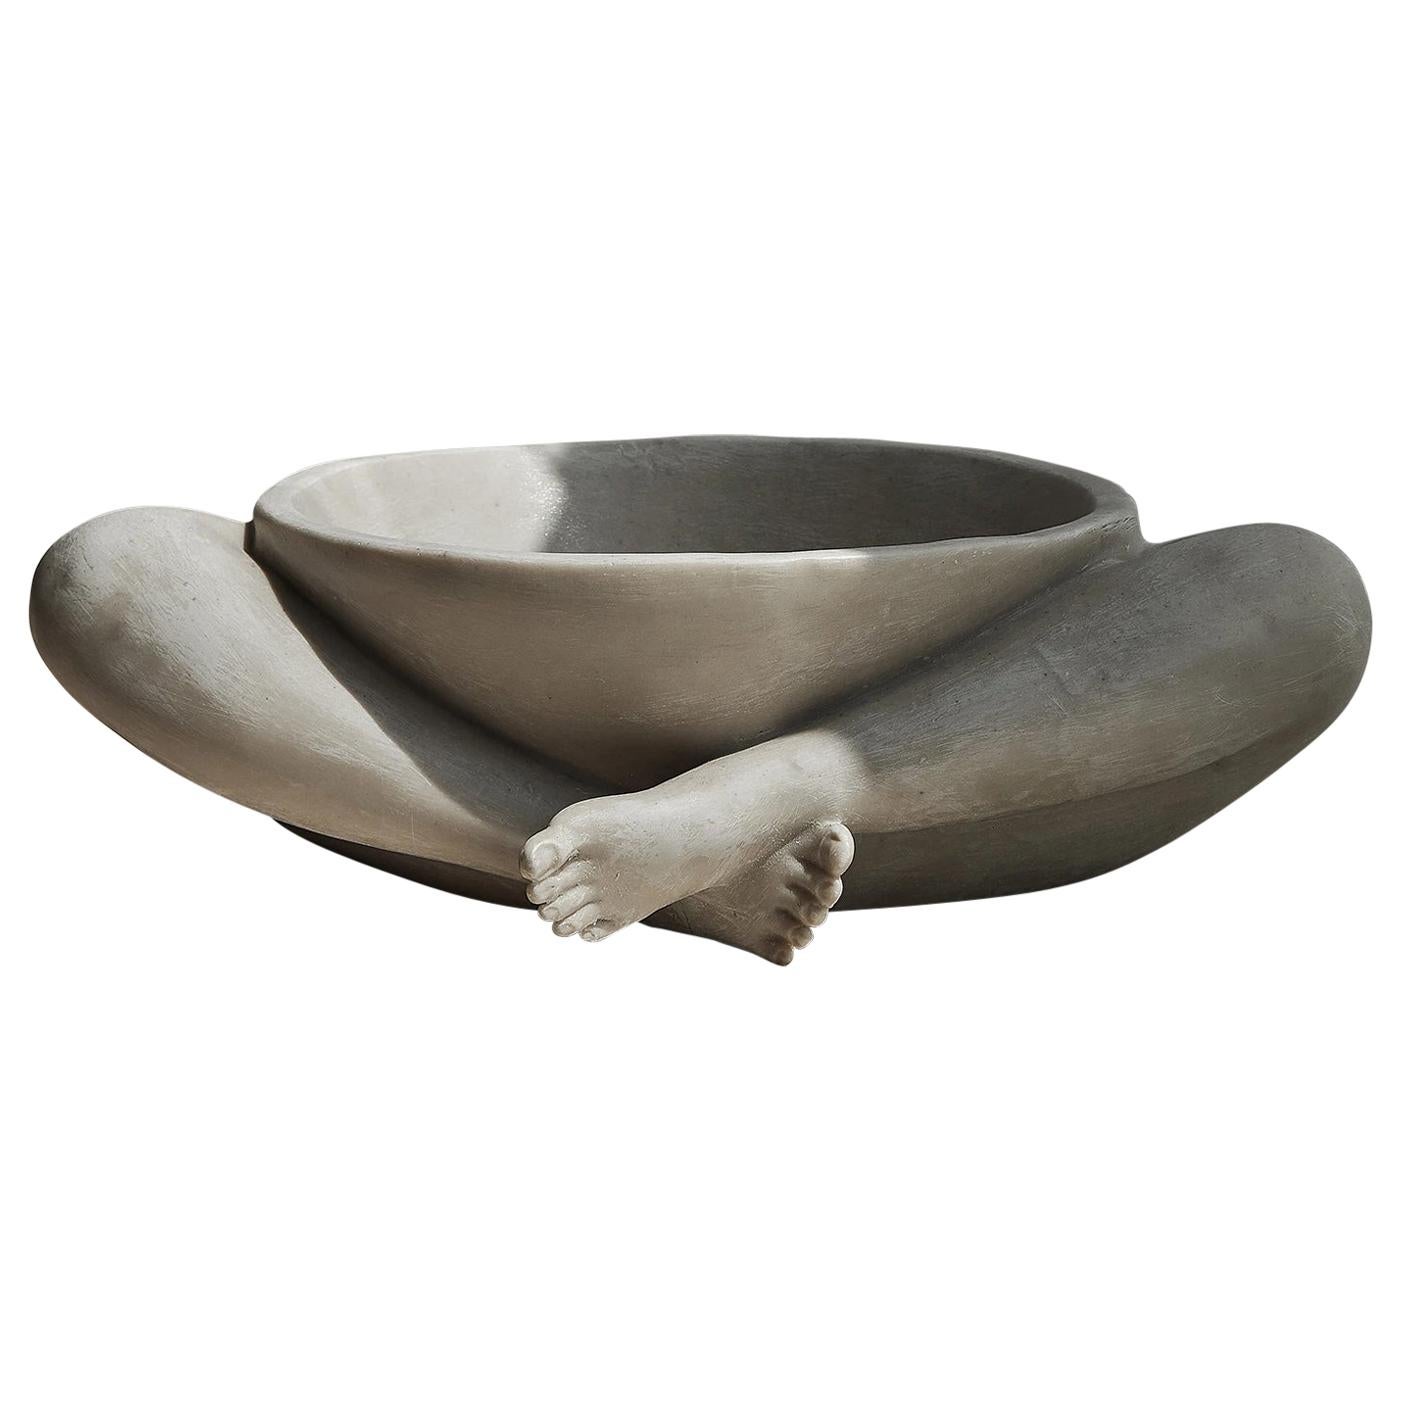 Relaxation Bowl